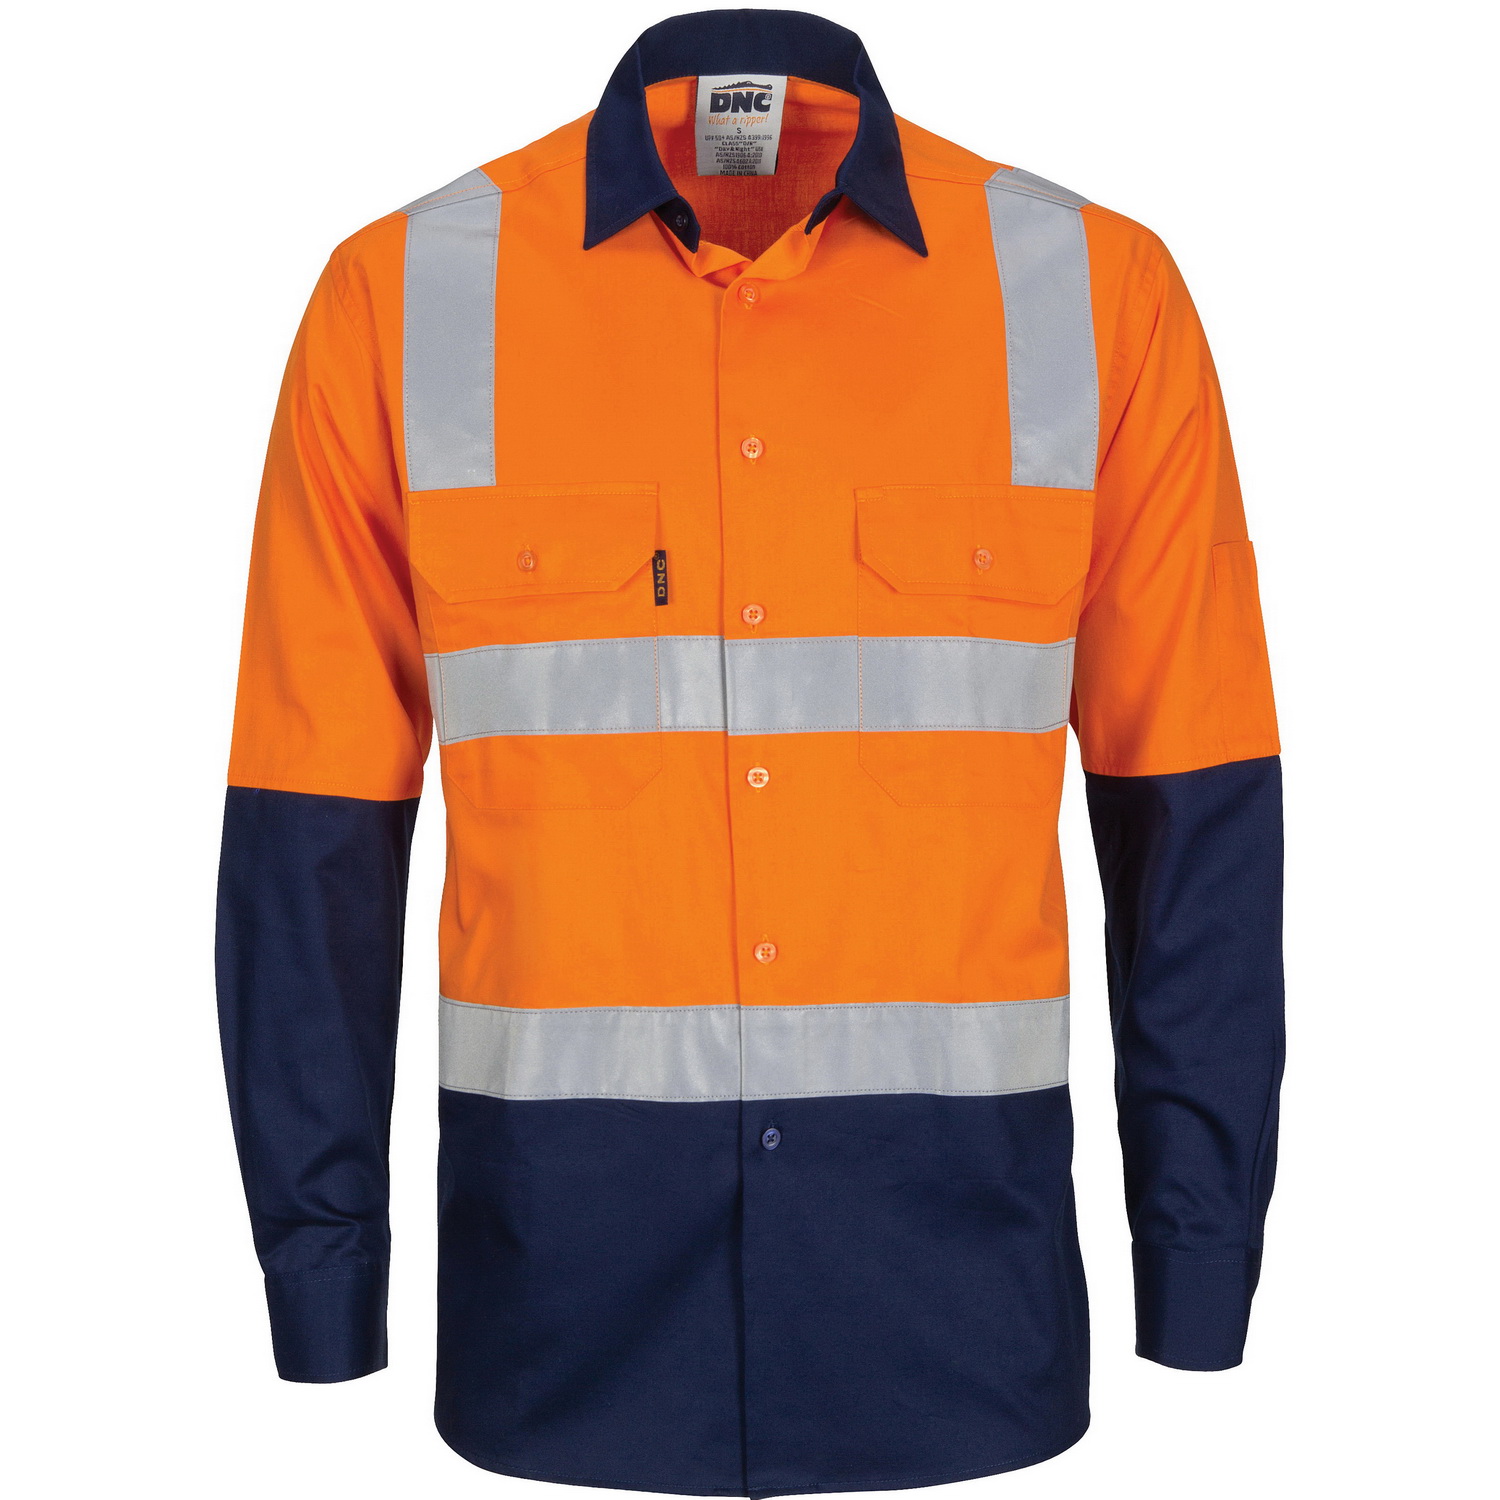 HIVIS Two Tone Cool-Breeze Cotton Shirt with Hoop & Shoulder CSR Reflective Tape - Long Sleeve